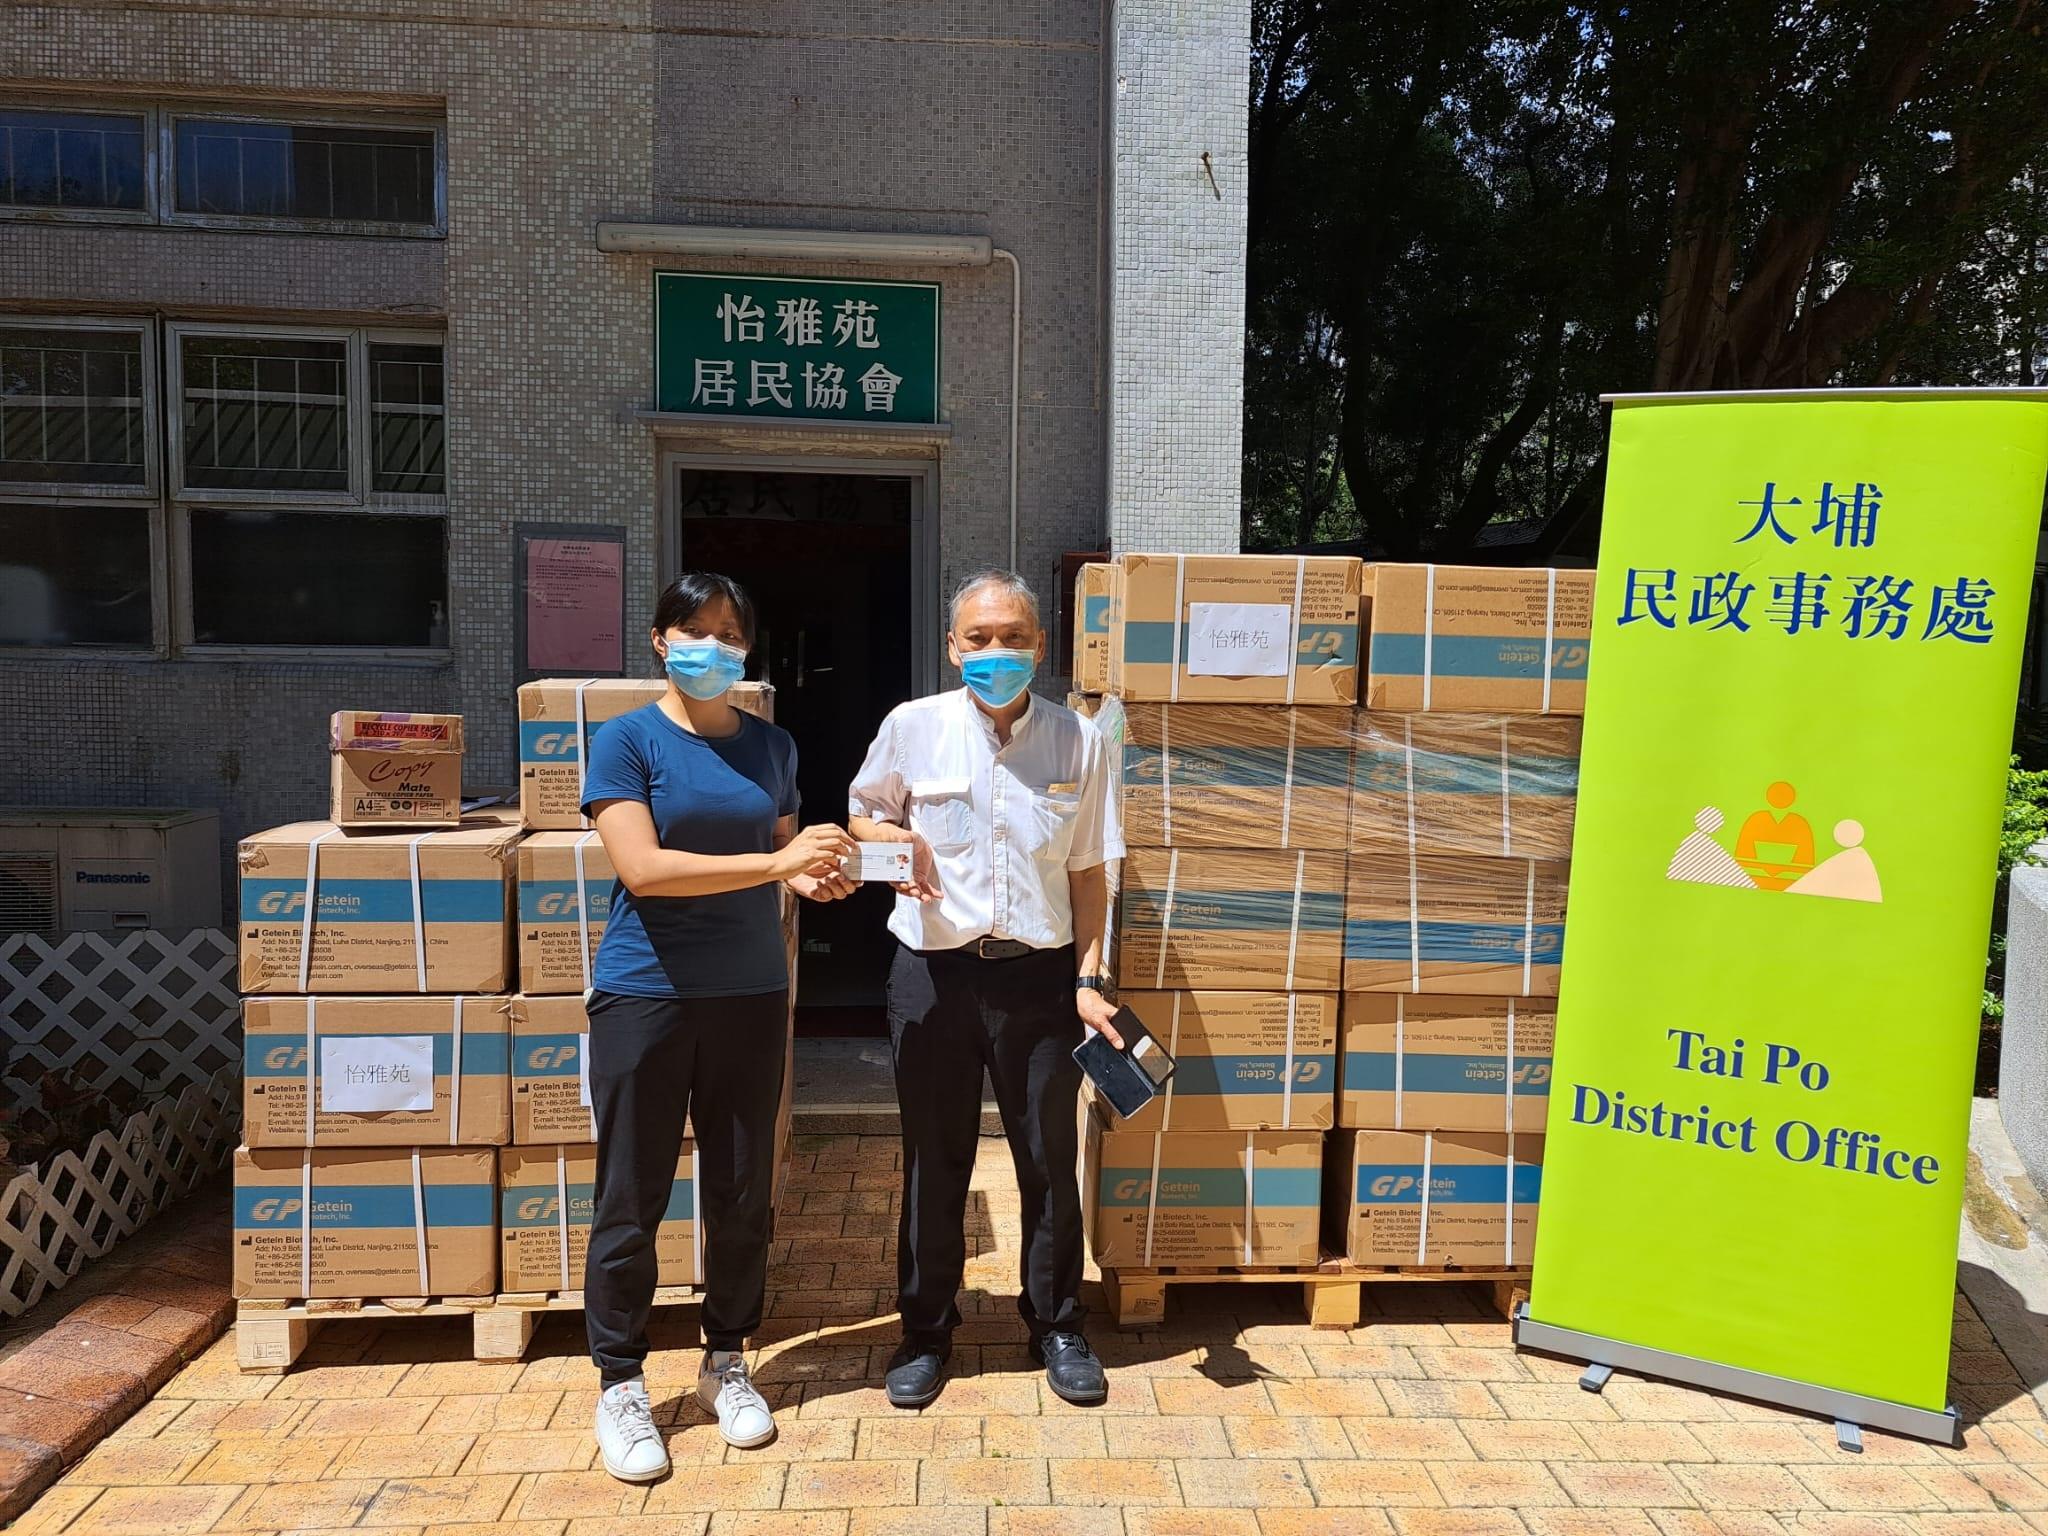 The Tai Po District Office today (July 12) distributed COVID-19 rapid test kits to households, cleansing workers and property management staff living and working in Yee Nga Court for voluntary testing through the property management company.